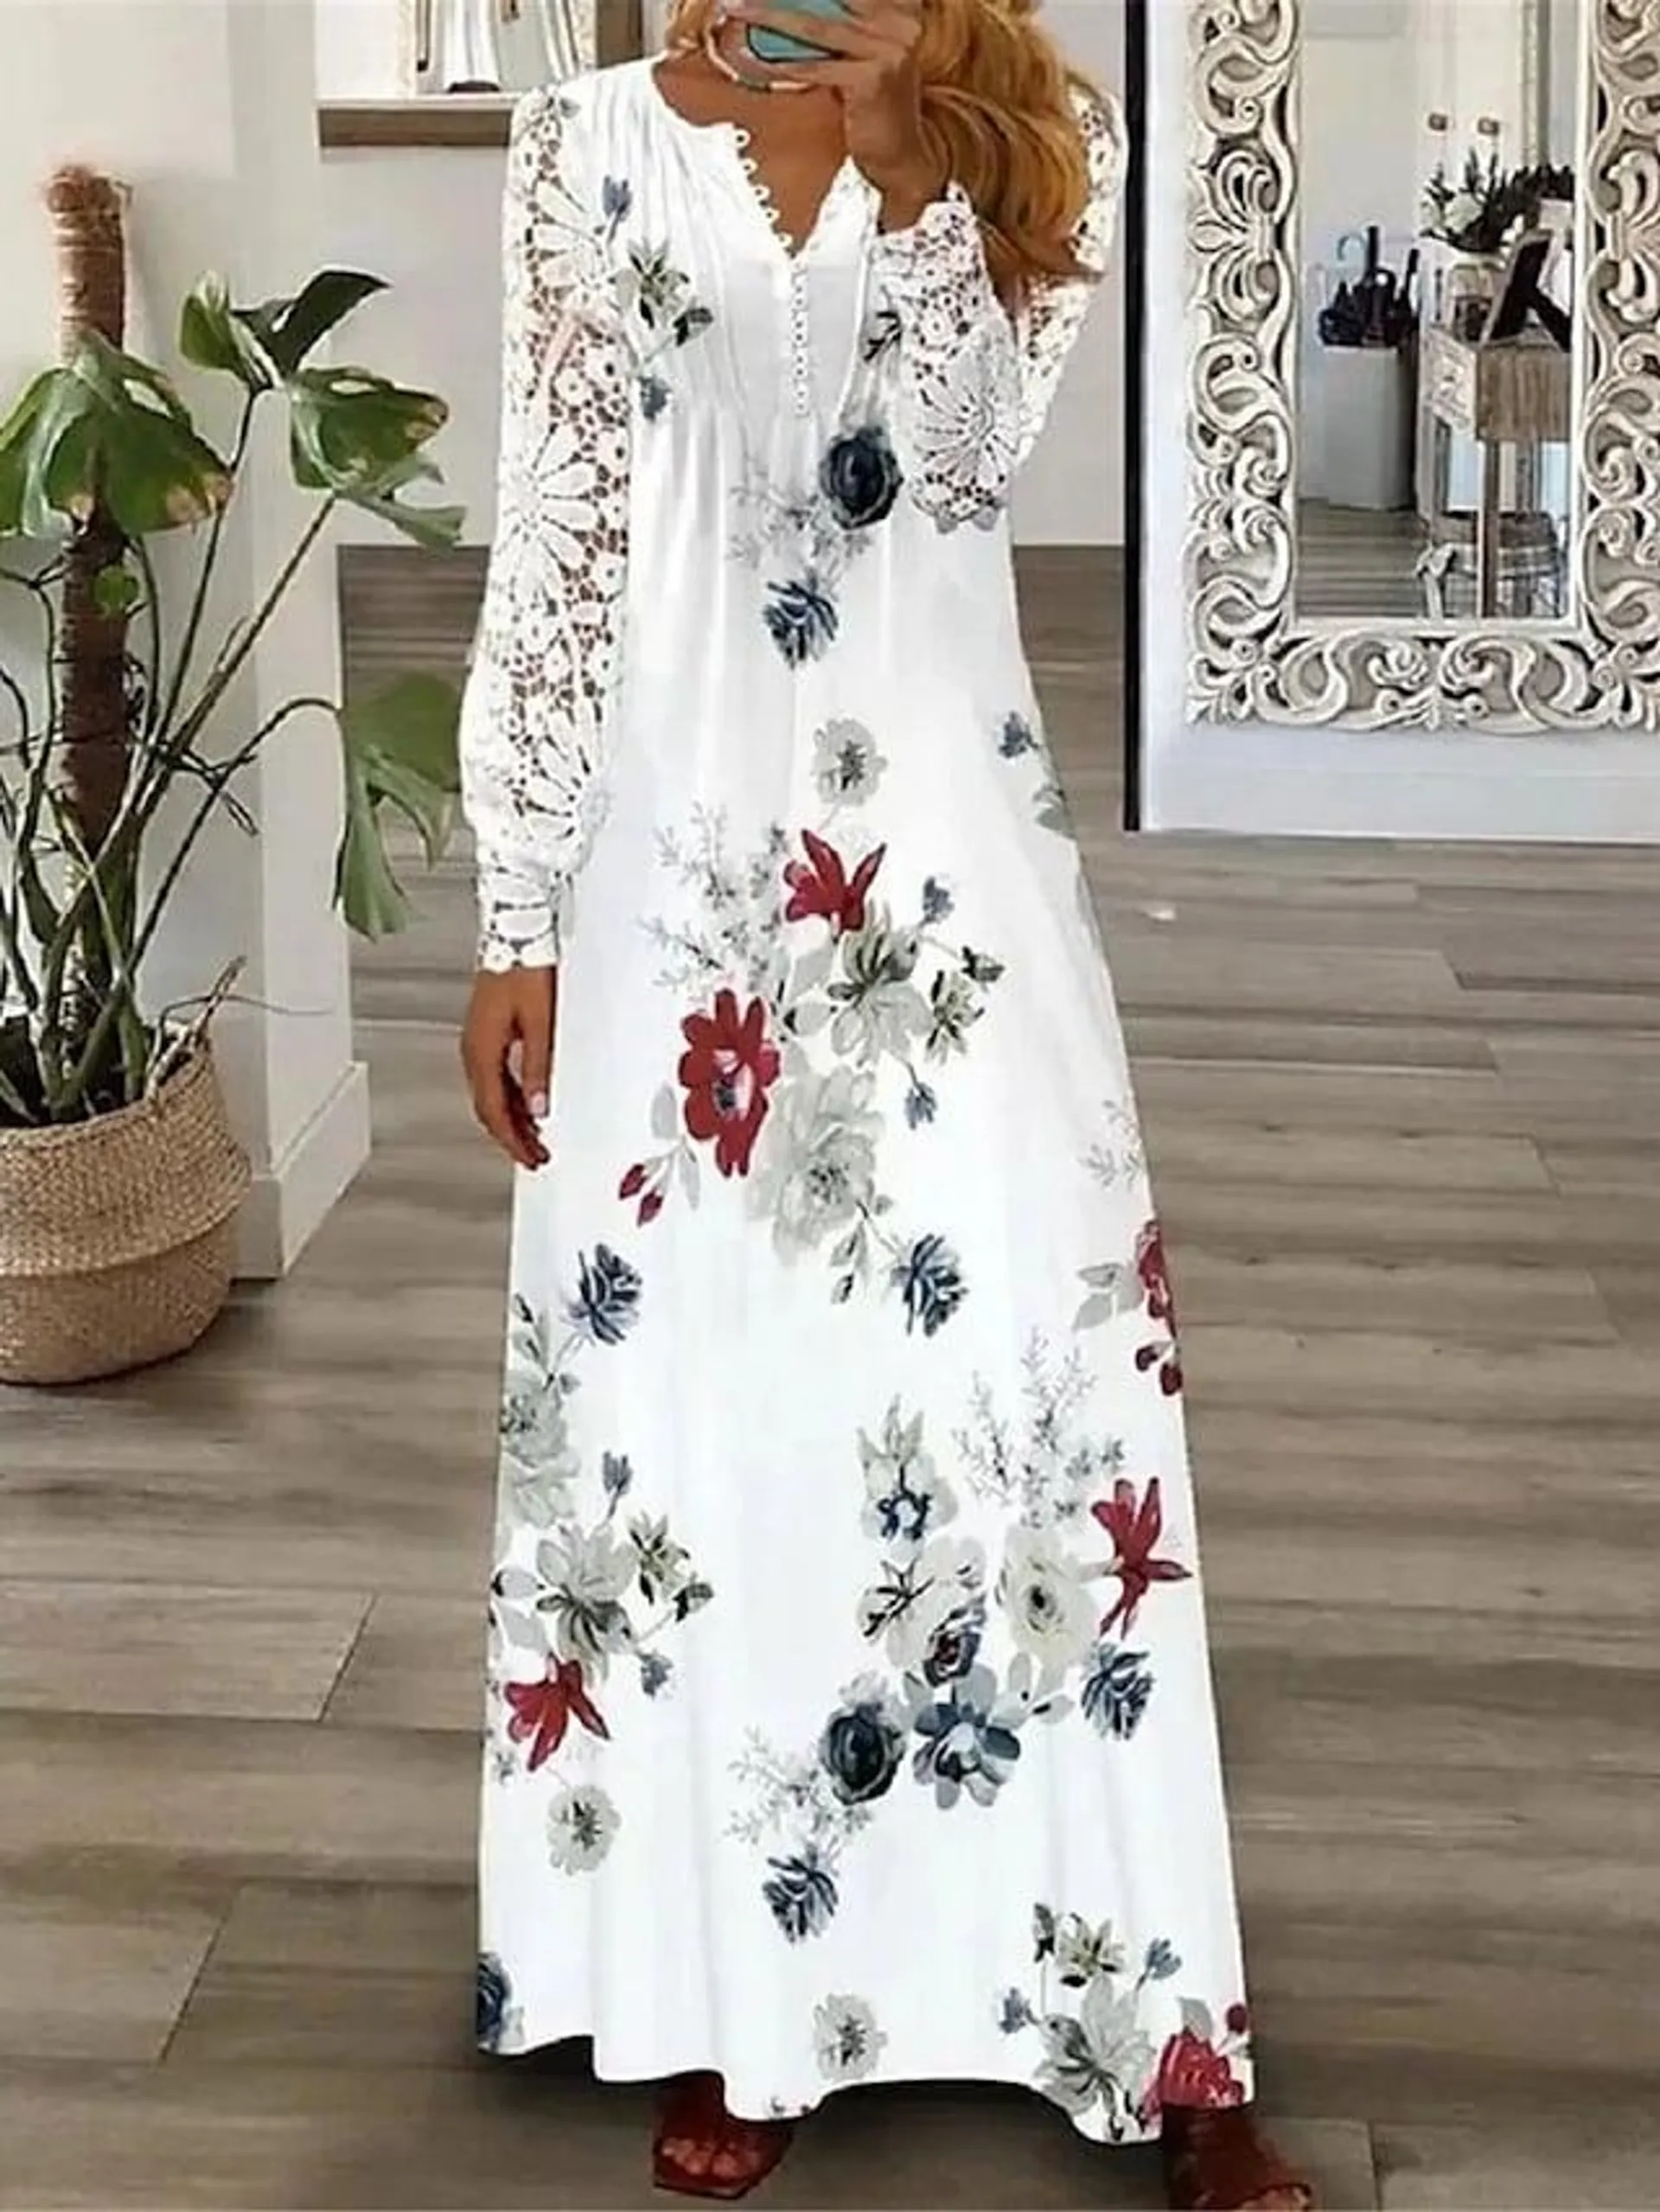 Women's Floral Lace Pleated Dresses Long Dress Maxi Dress A Line Dress Print Dress Fashion Casual Outdoor Daily Button Long Sleeve V Neck Dress Regular Fit White Pink Red Spring Summer S M L XL